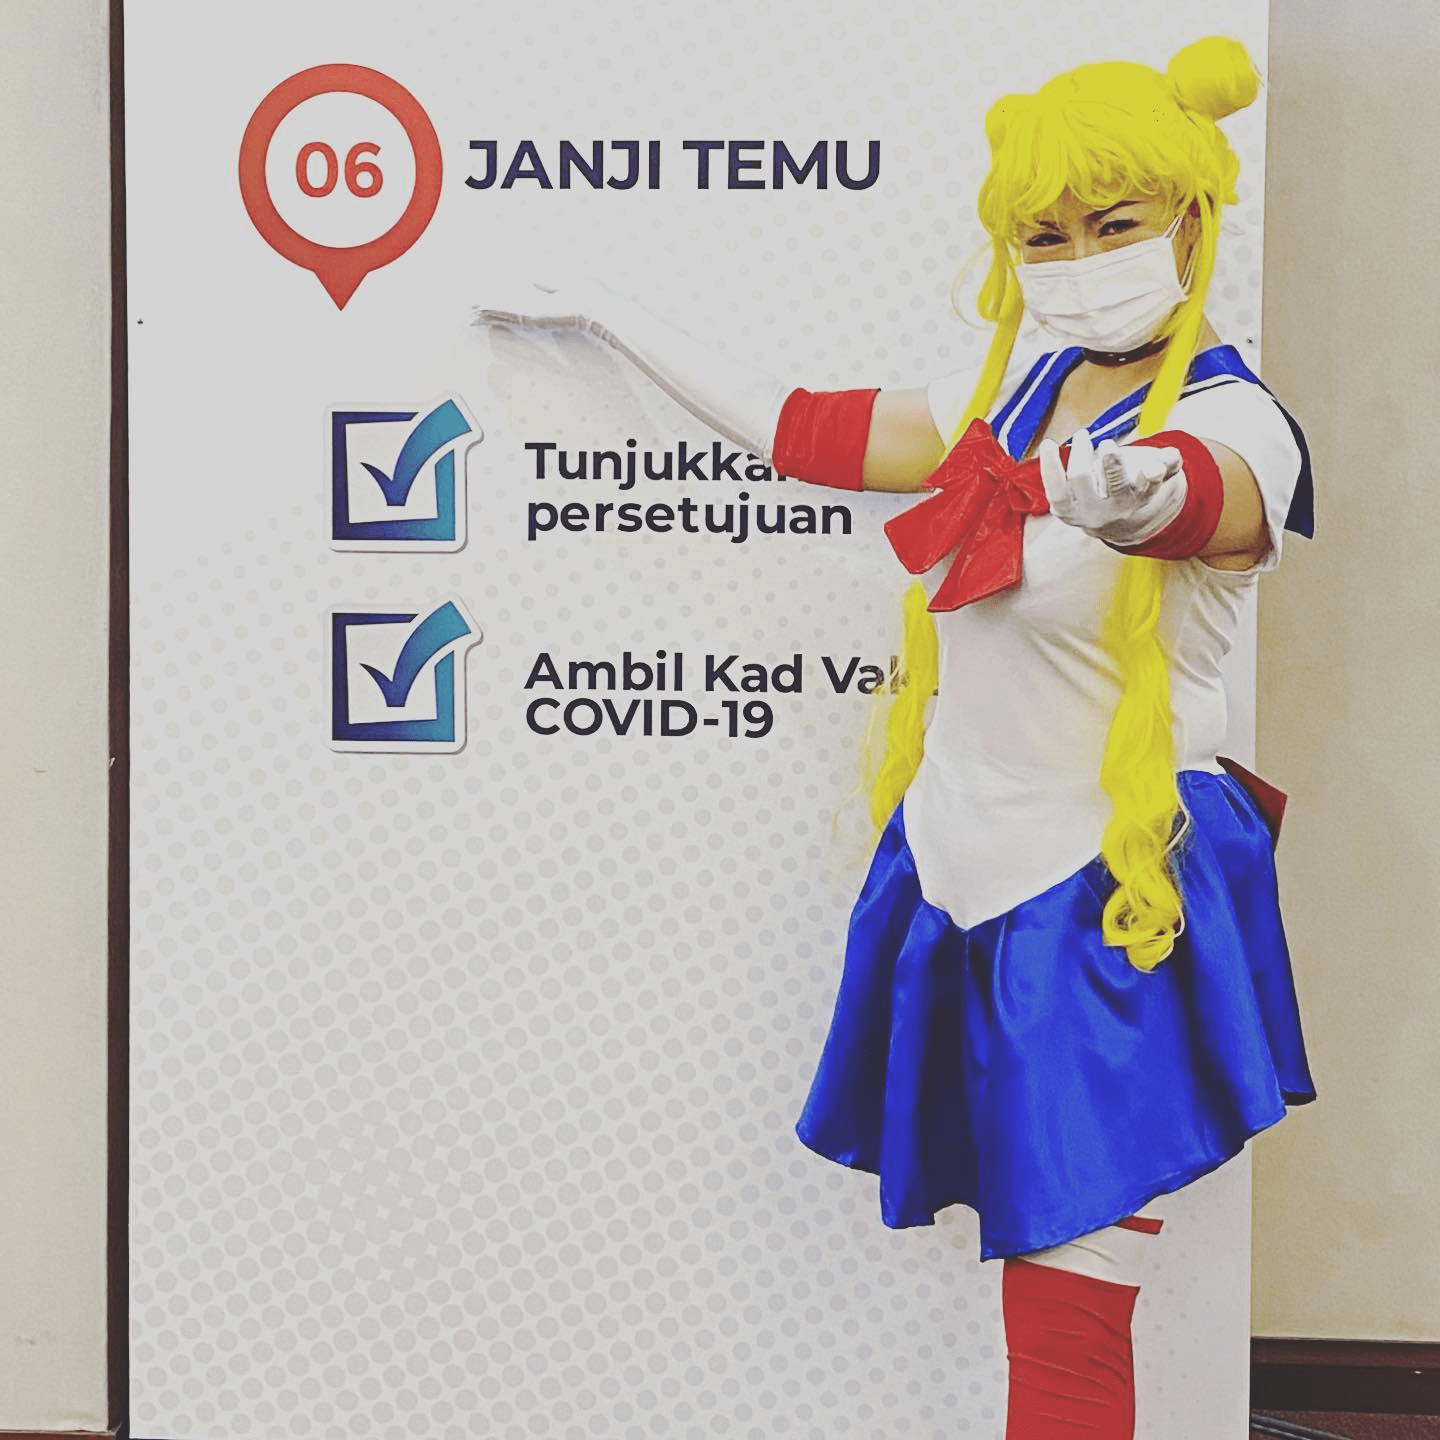 Malaysians wear costumes to vaccination - Sailor Moon